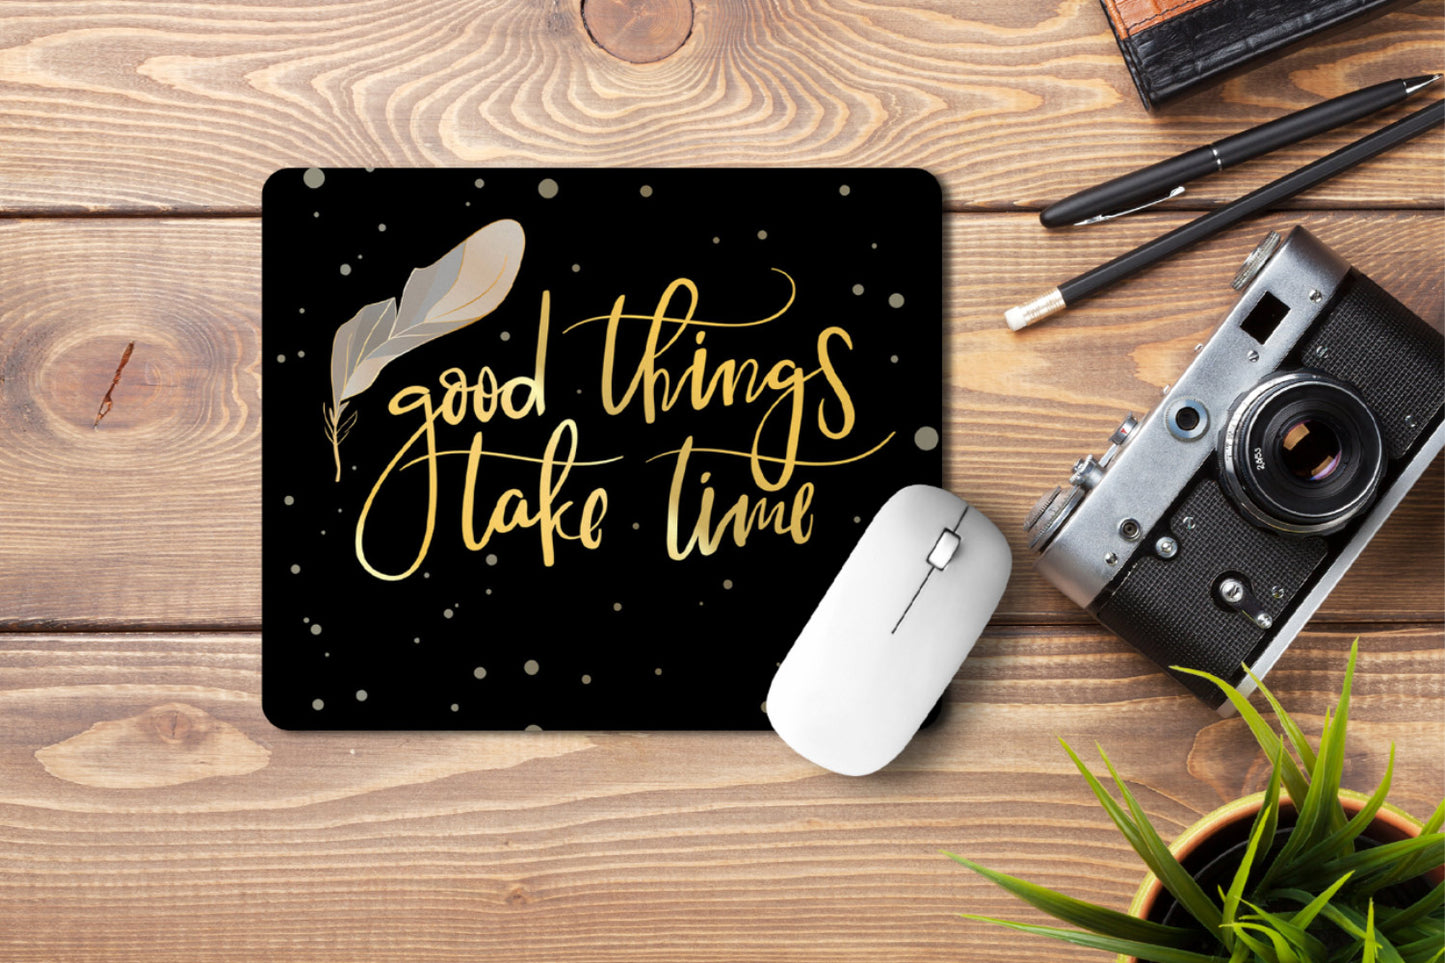 Products Good things take time ' Printed Non-Slip Rubber Base Mouse Pad for Laptop, PC, Computer.